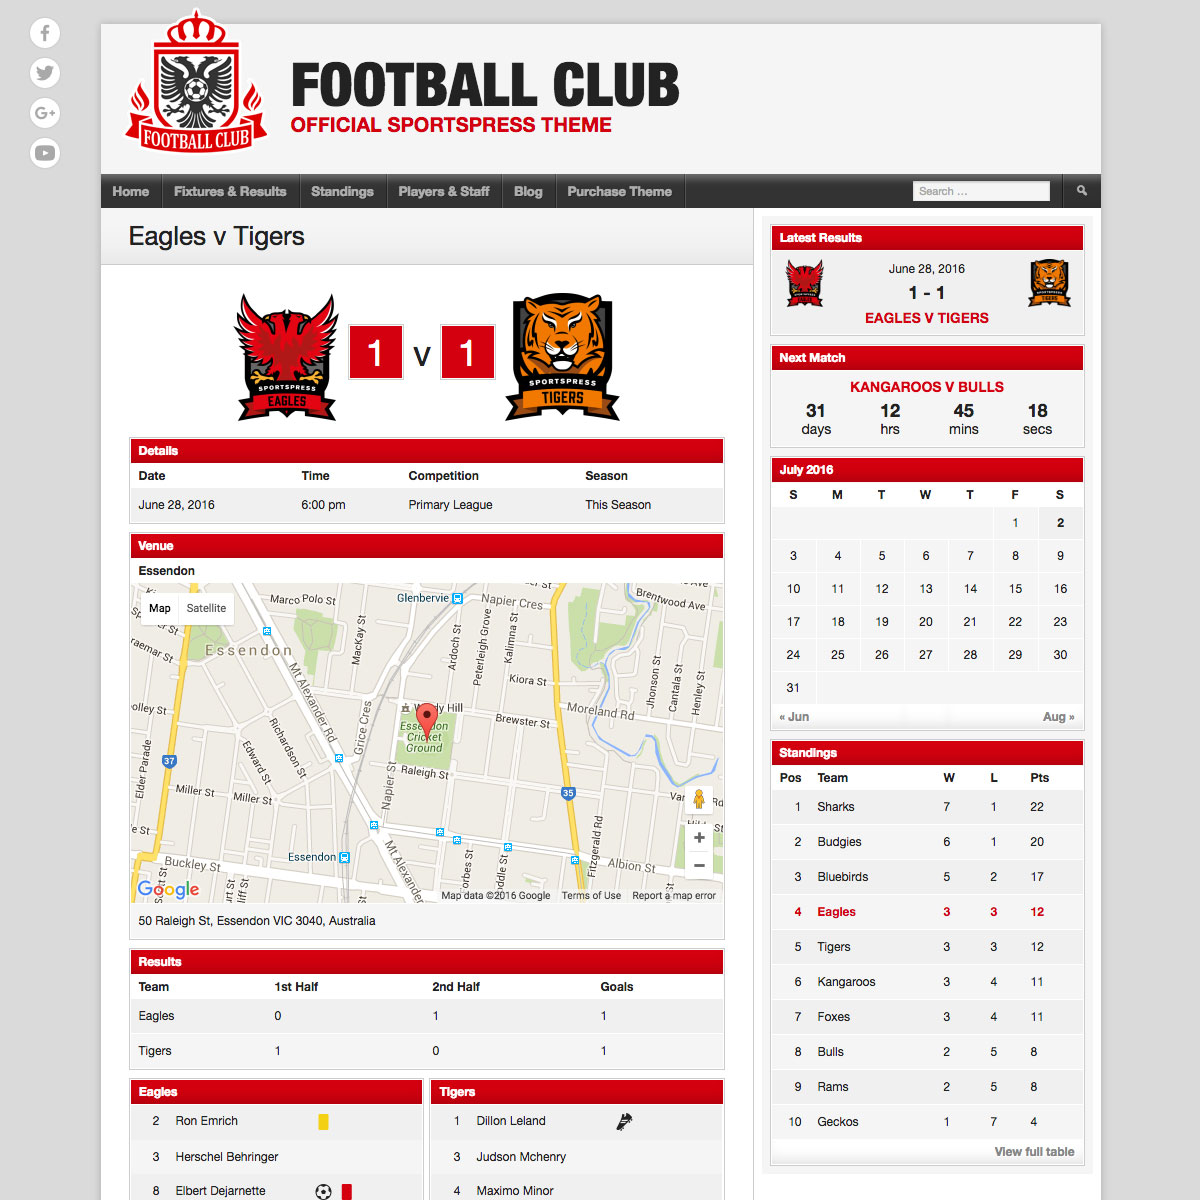 Football Club event page